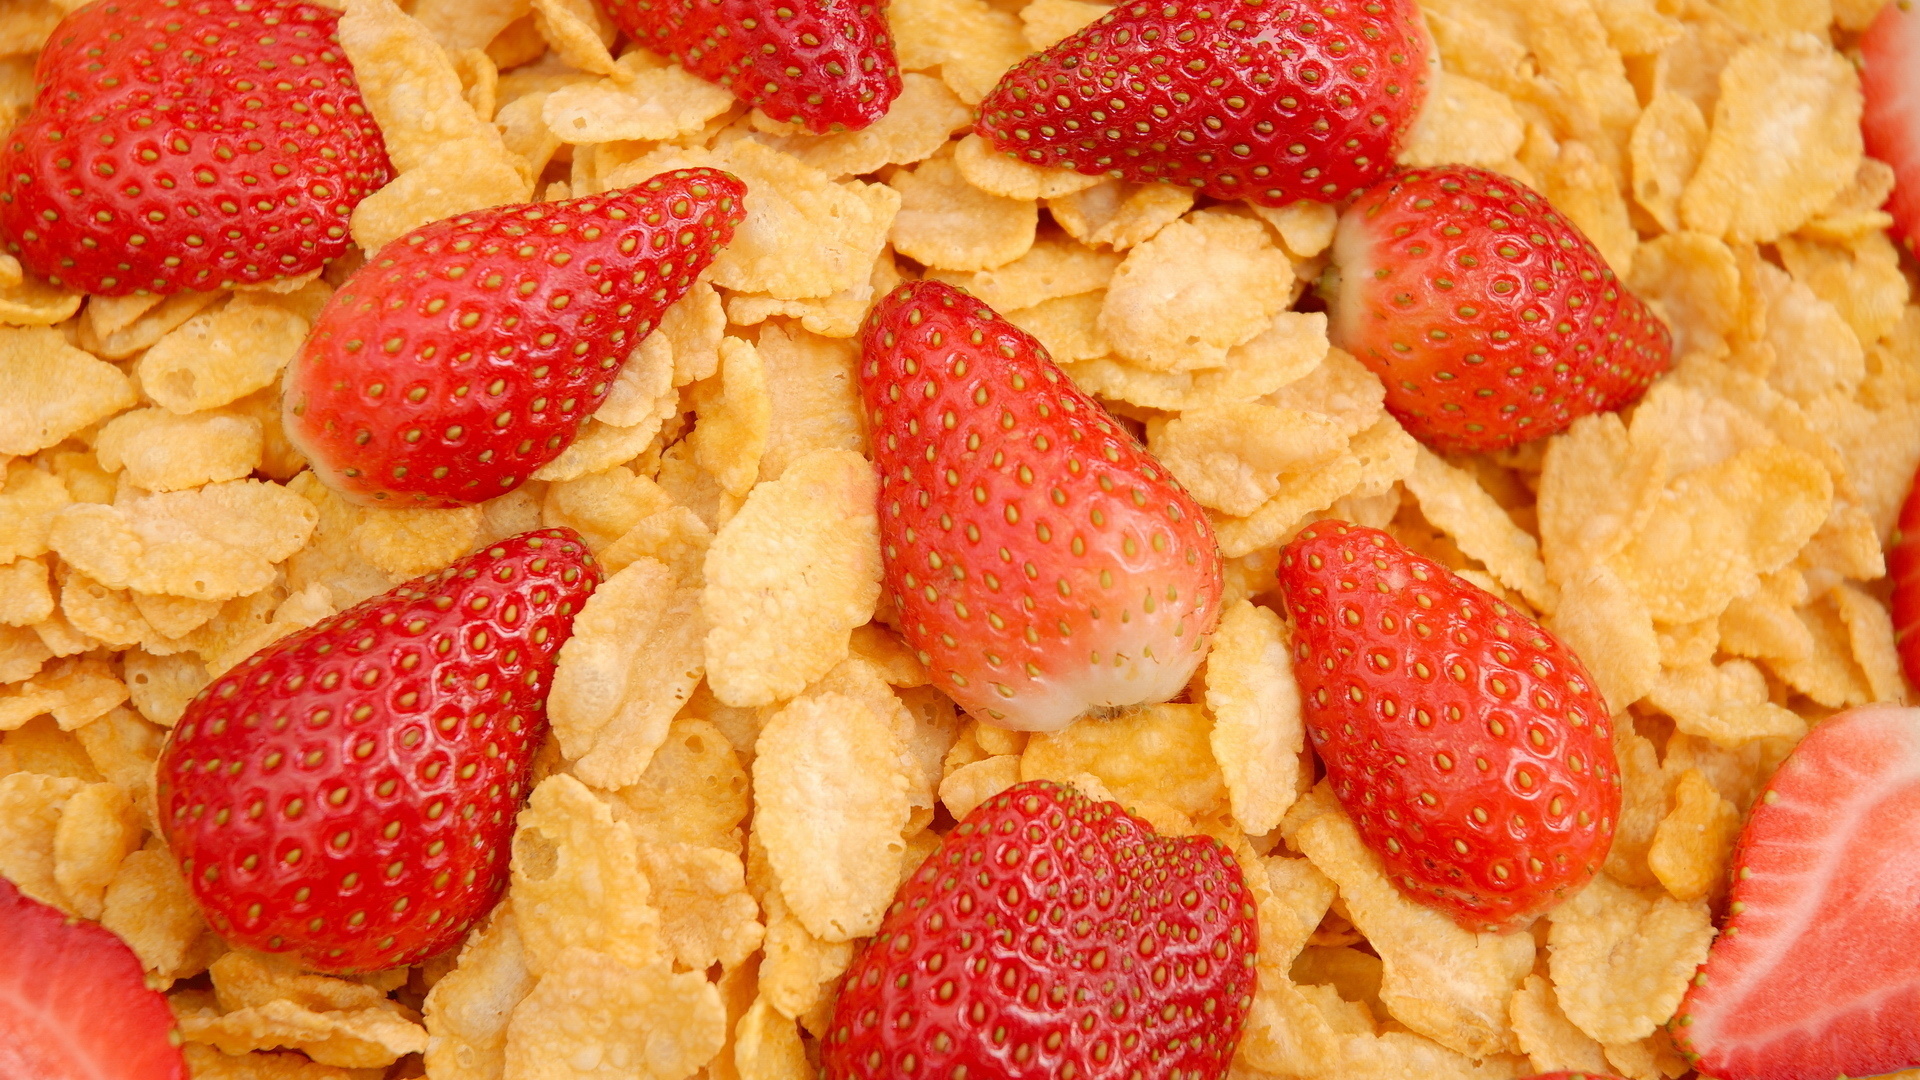 Wallpapers strawberry flakes food on the desktop